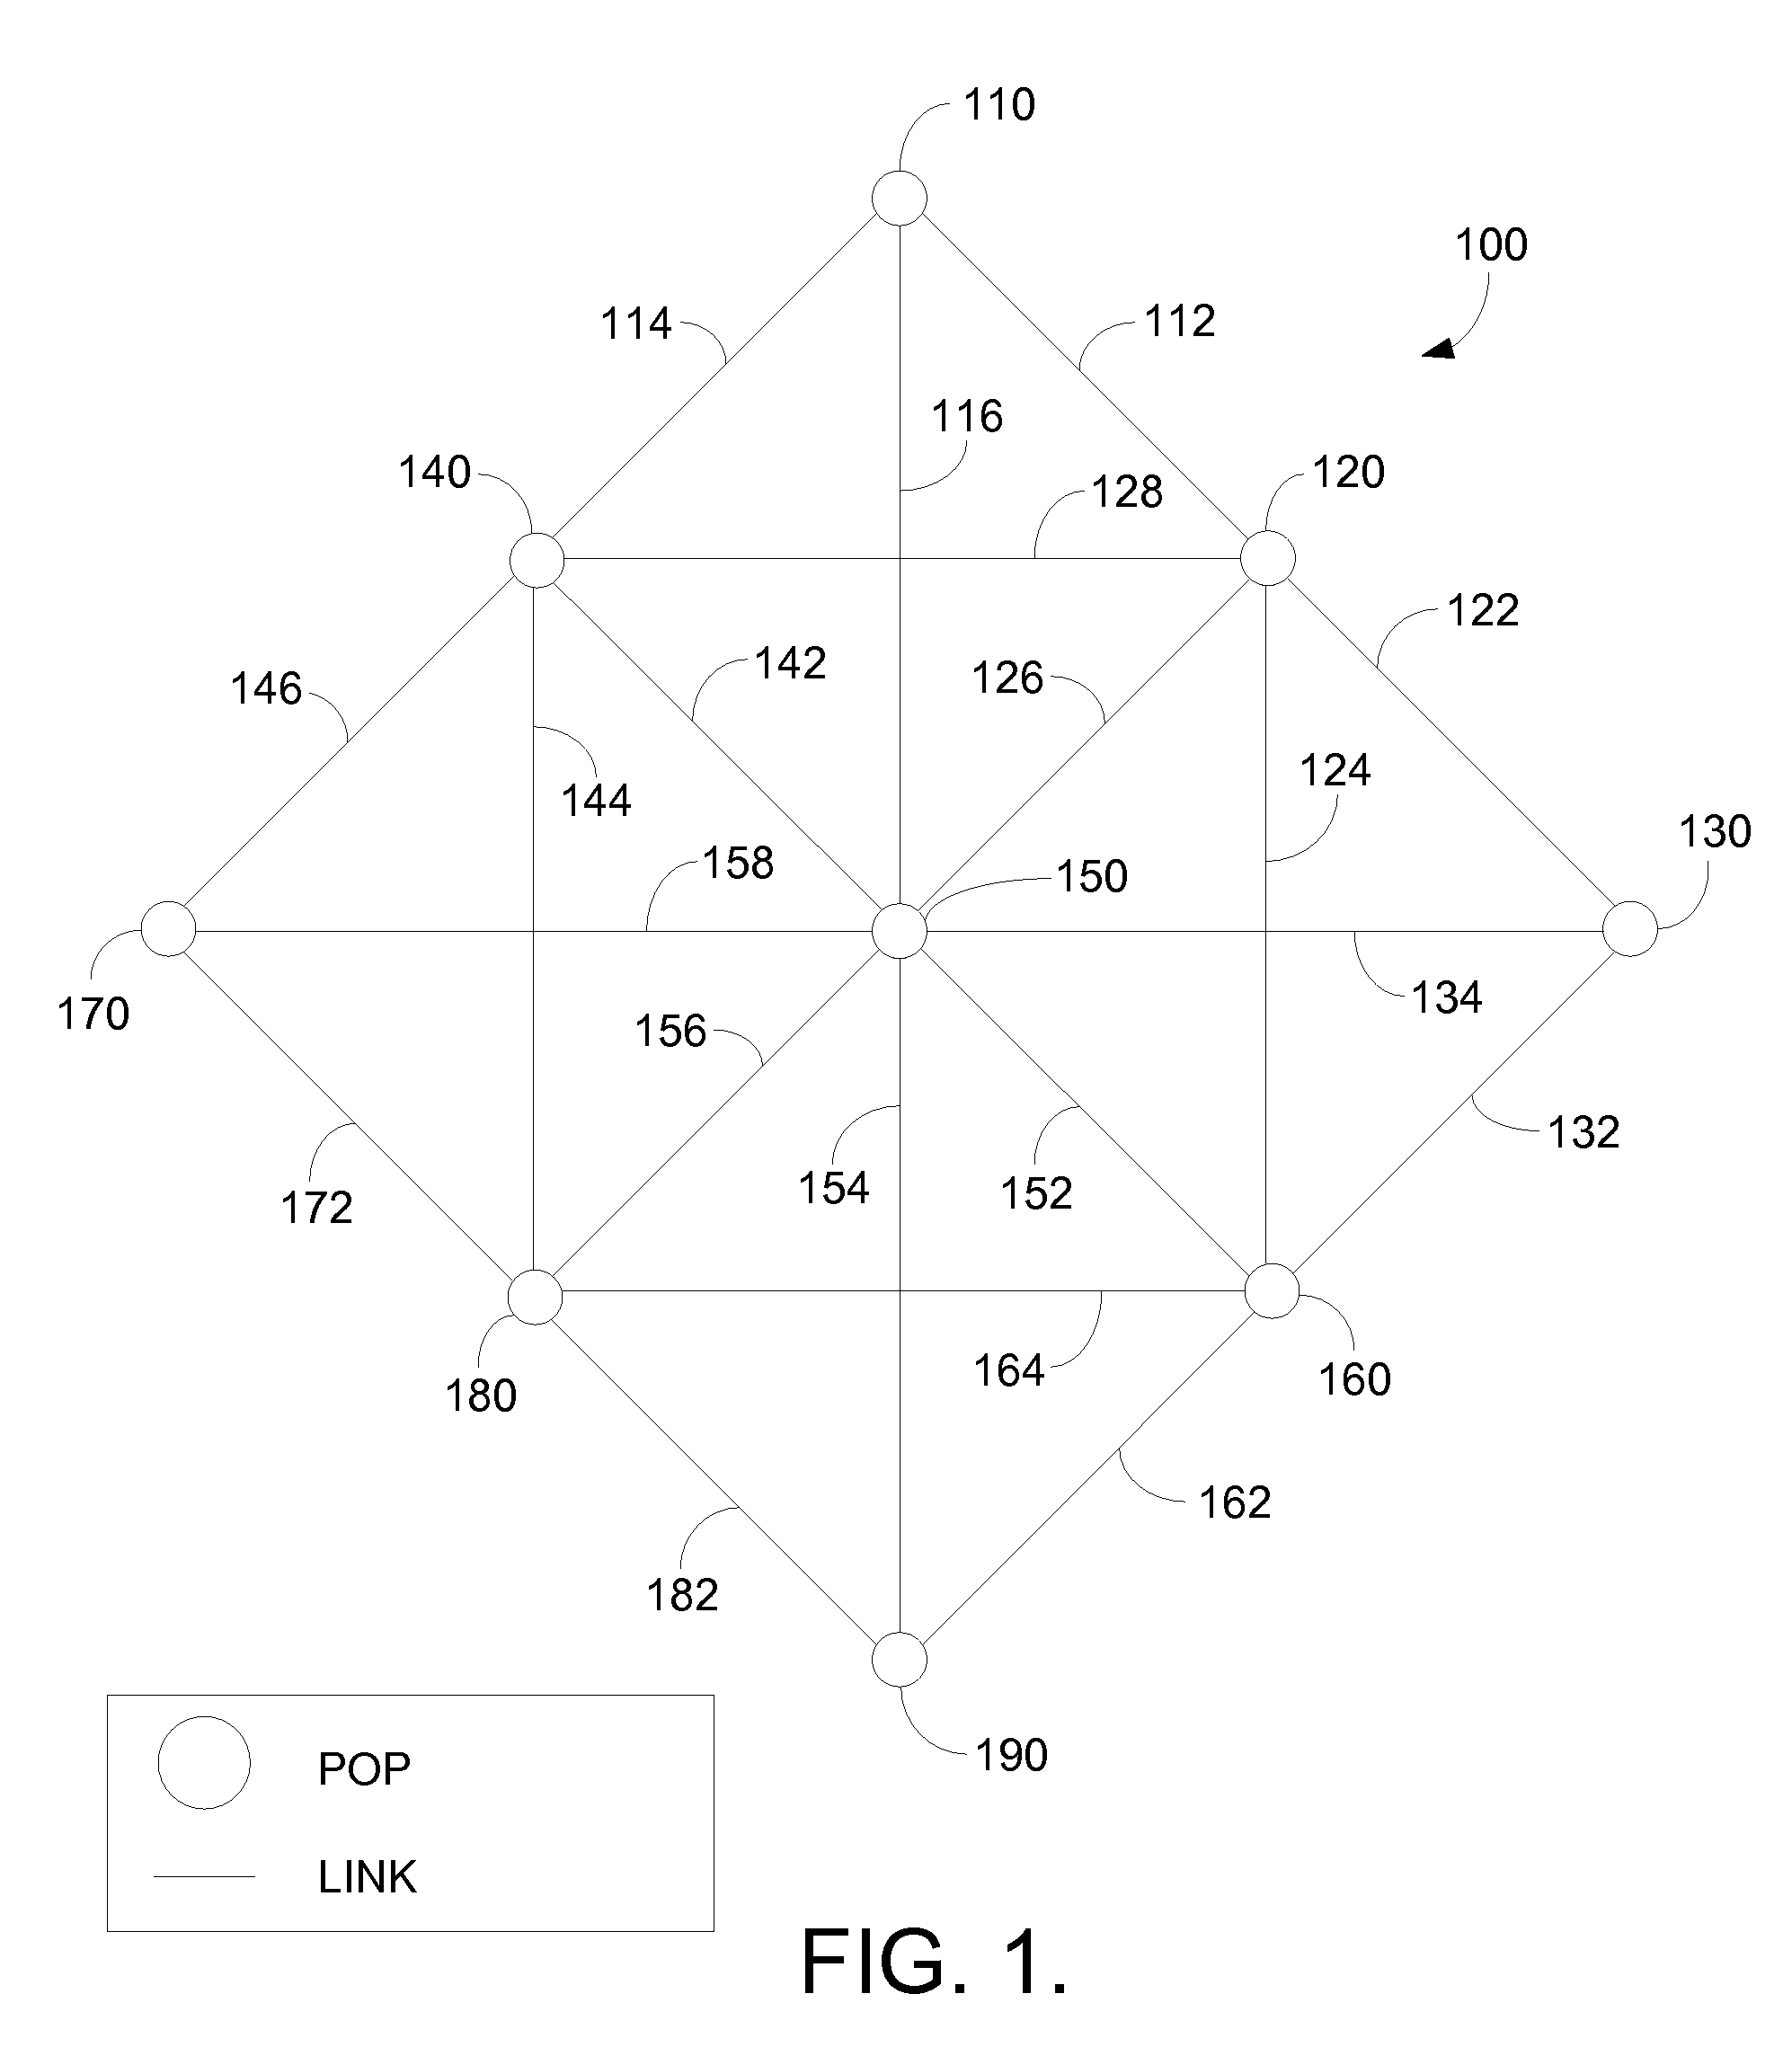 Method for deflection routing of data packets to alleviate link overload in IP networks